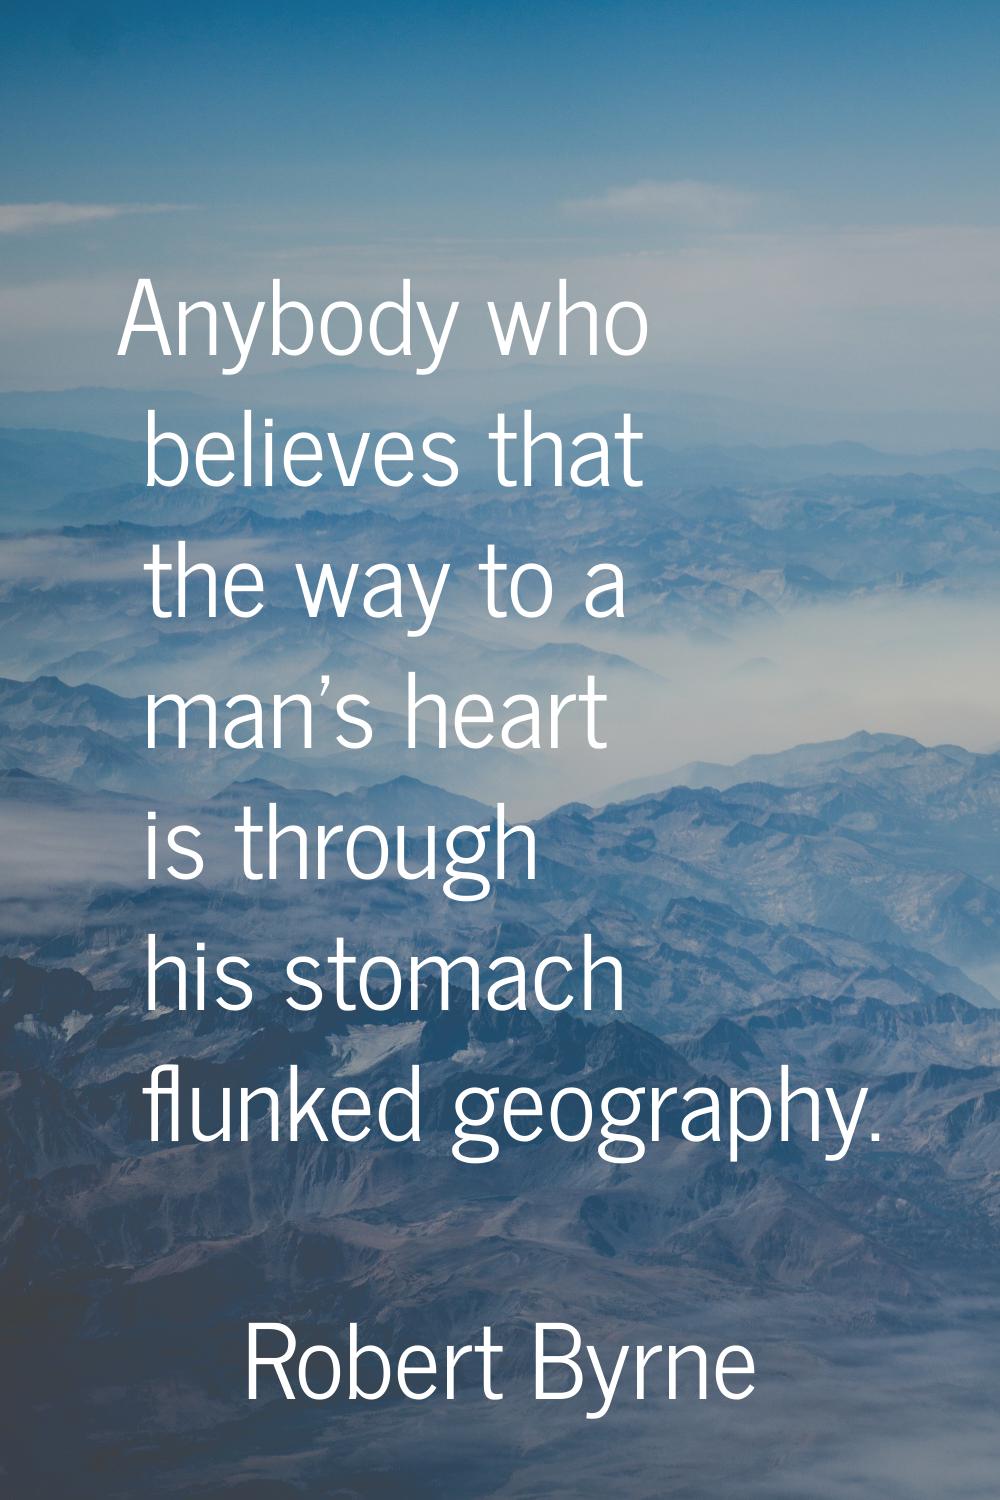 Anybody who believes that the way to a man's heart is through his stomach flunked geography.